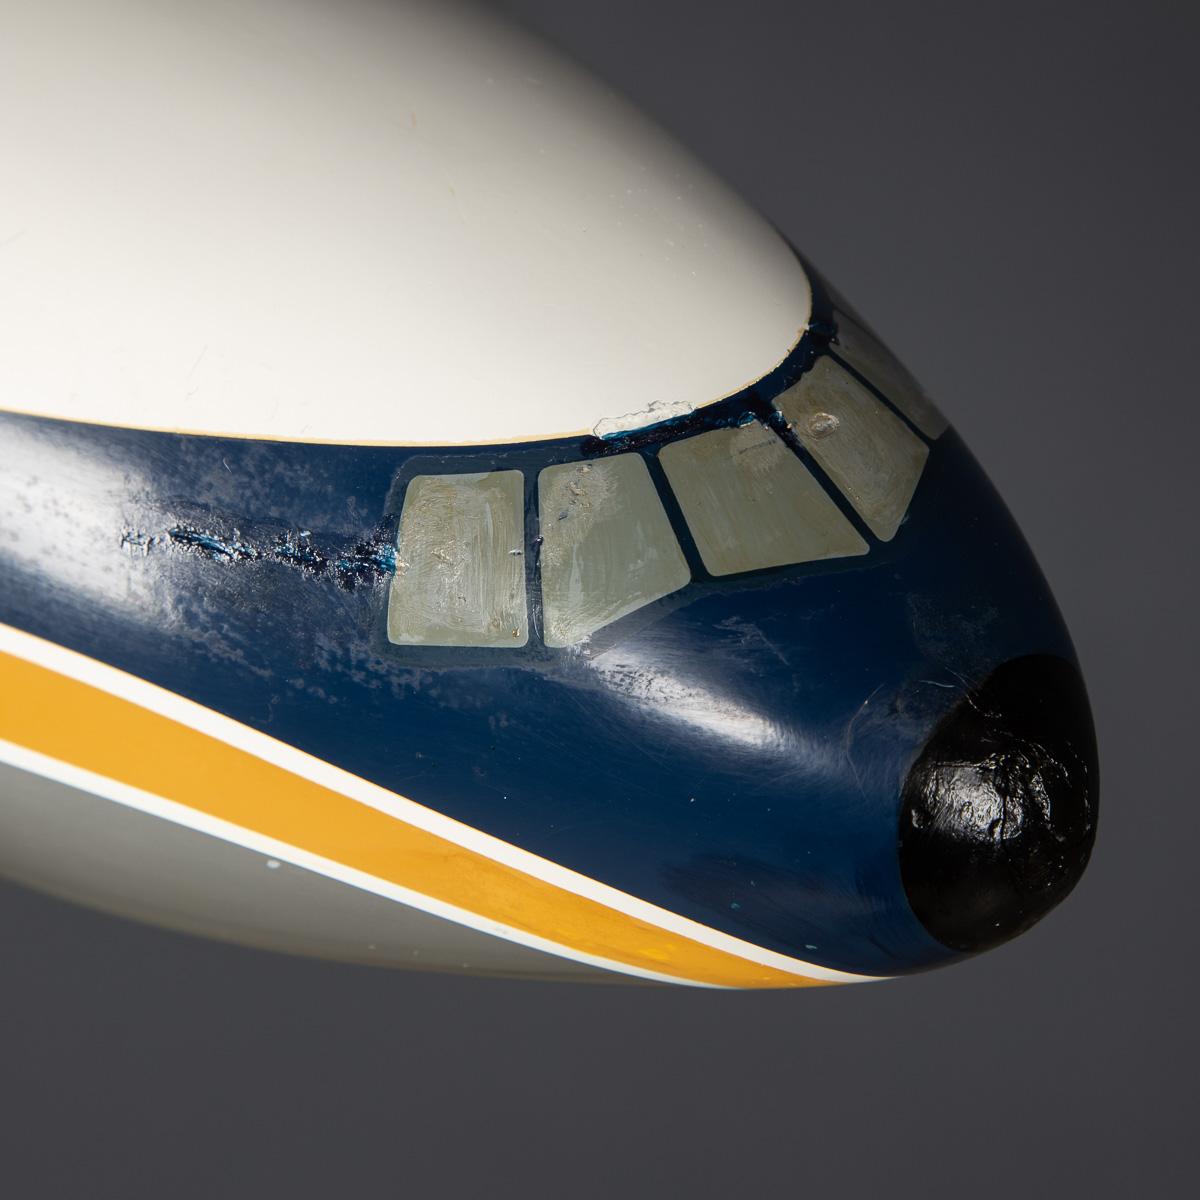 20th Century British Caledonian Dc10 Fibre Glass Airplane Model, c.1970 For Sale 9